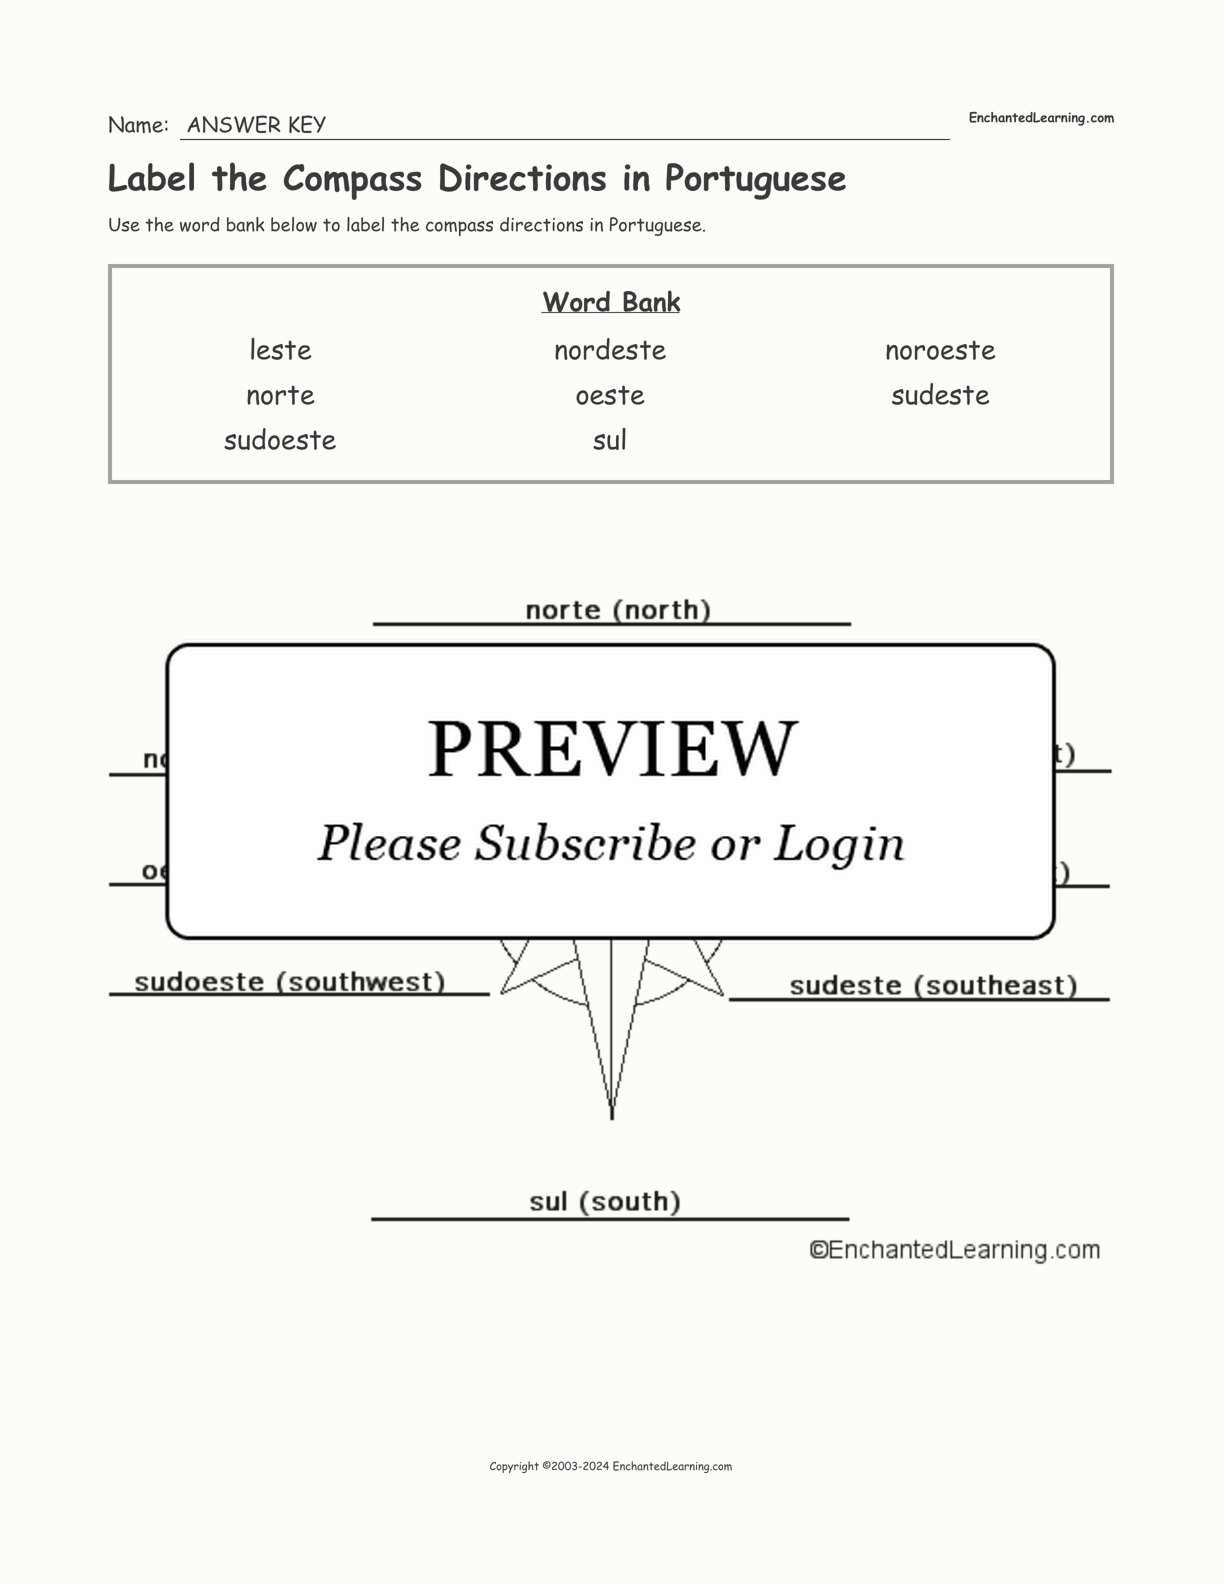 Label the Compass Directions in Portuguese interactive worksheet page 2